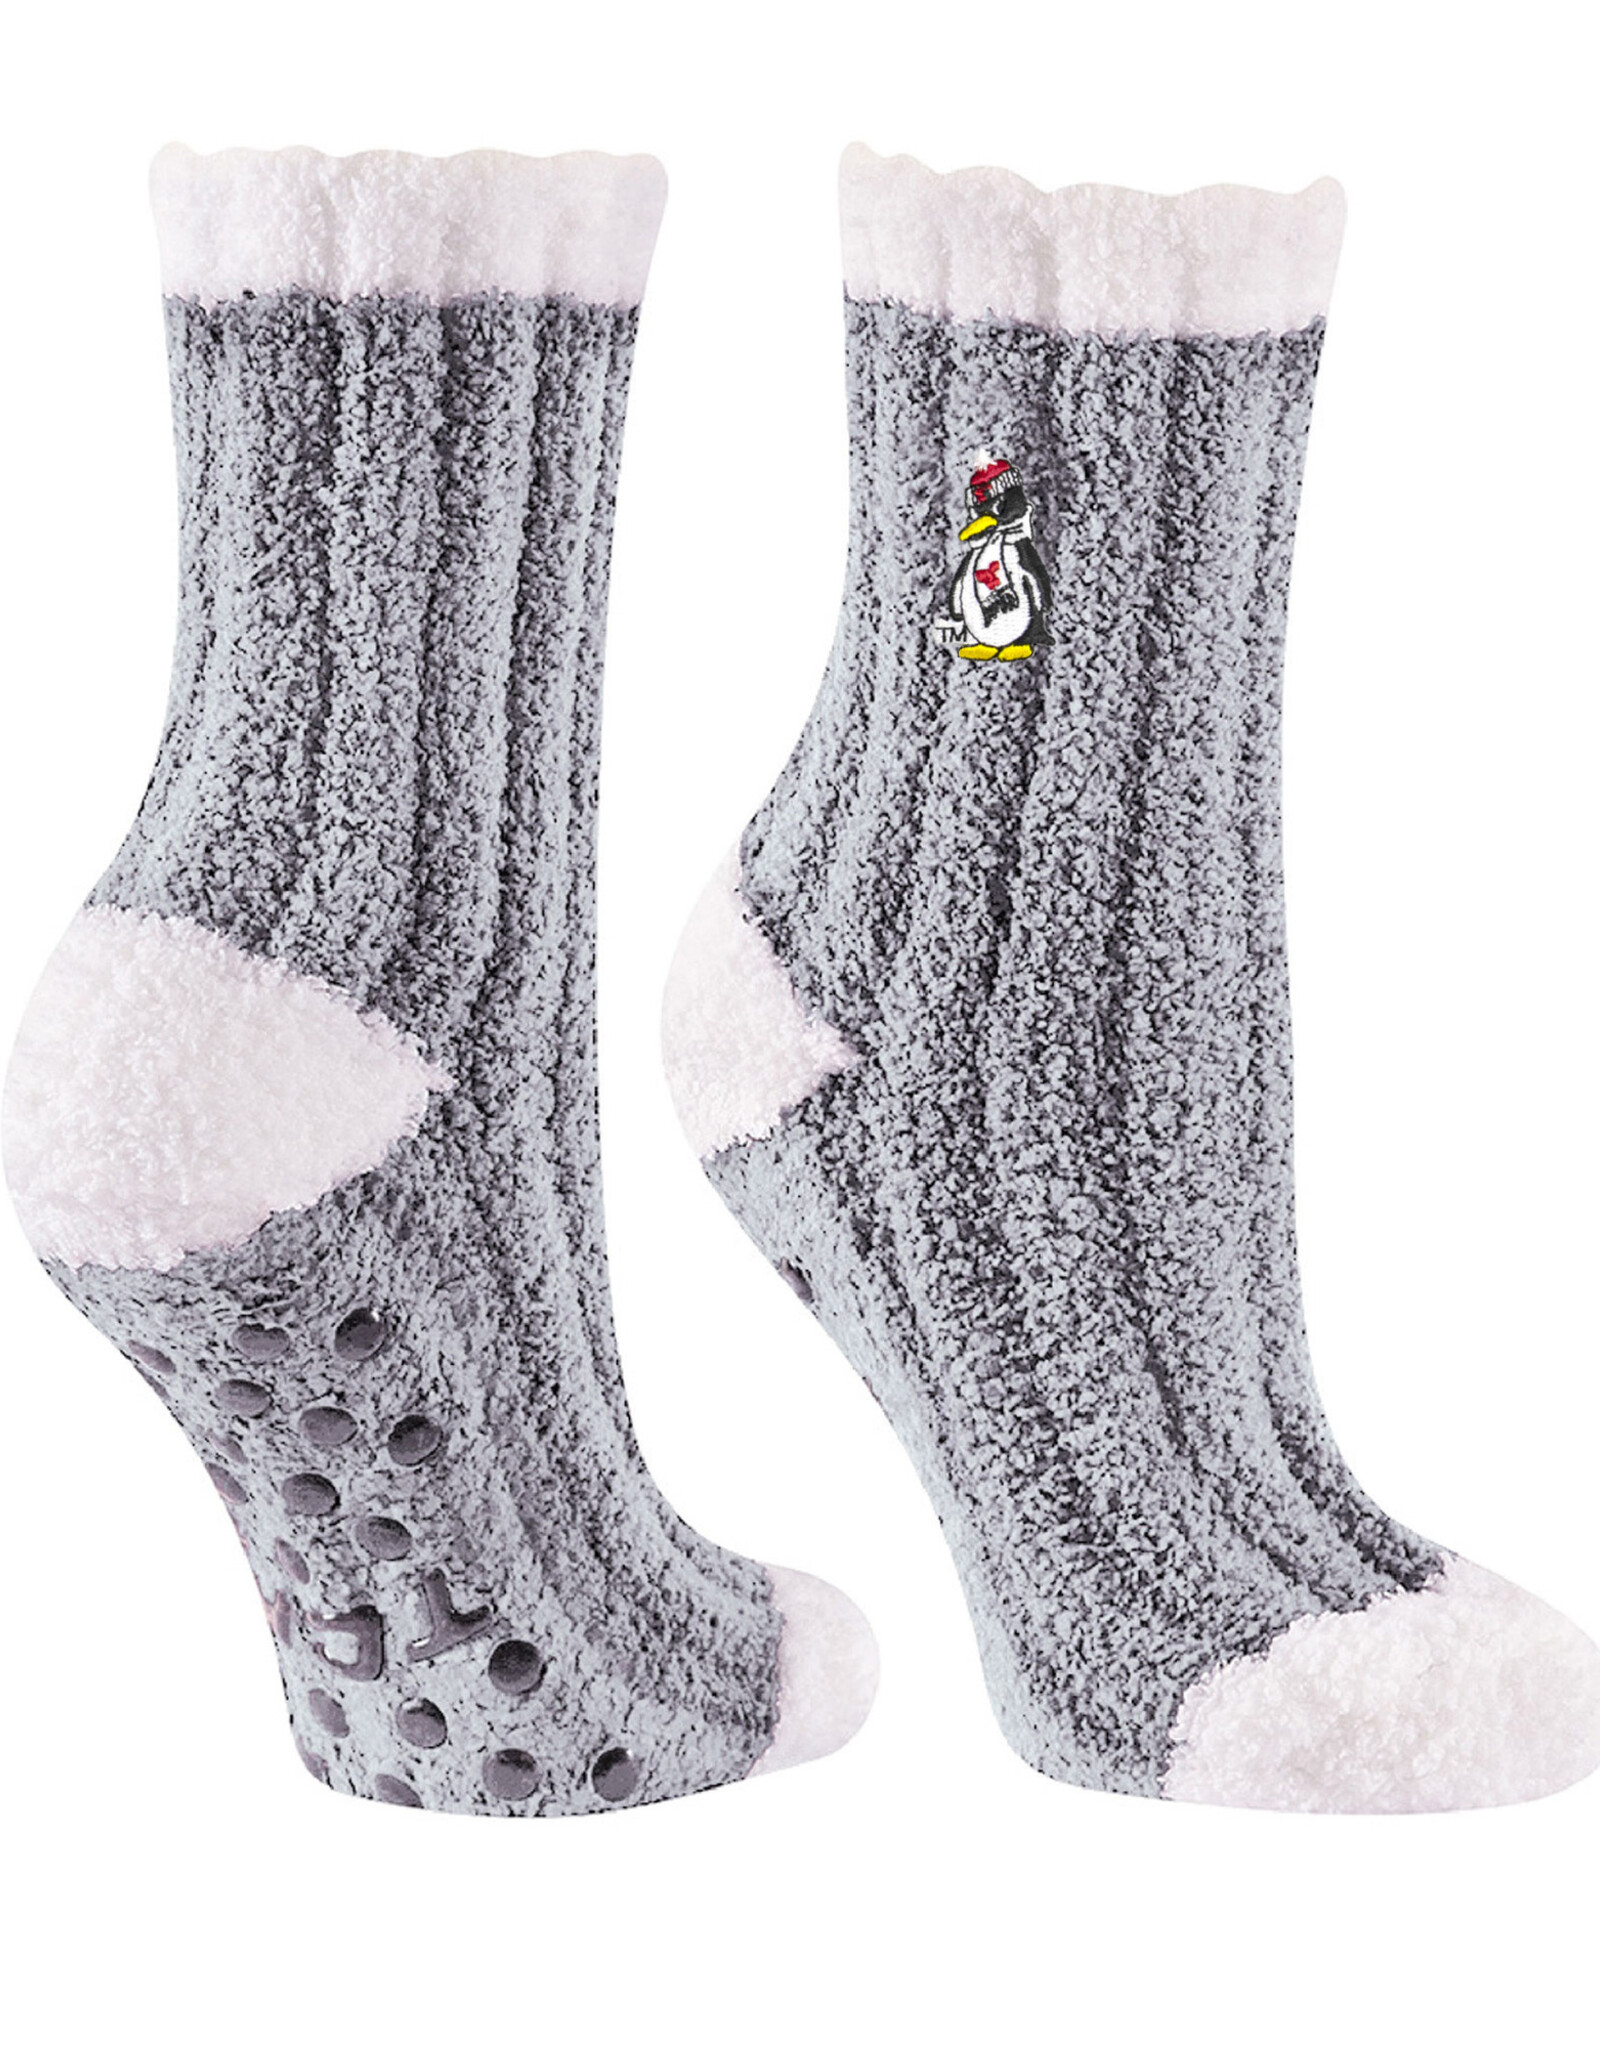 TWIN CITY KNITTING CO Youngstown State Penguins Warm Fuzzy Socks - Grey